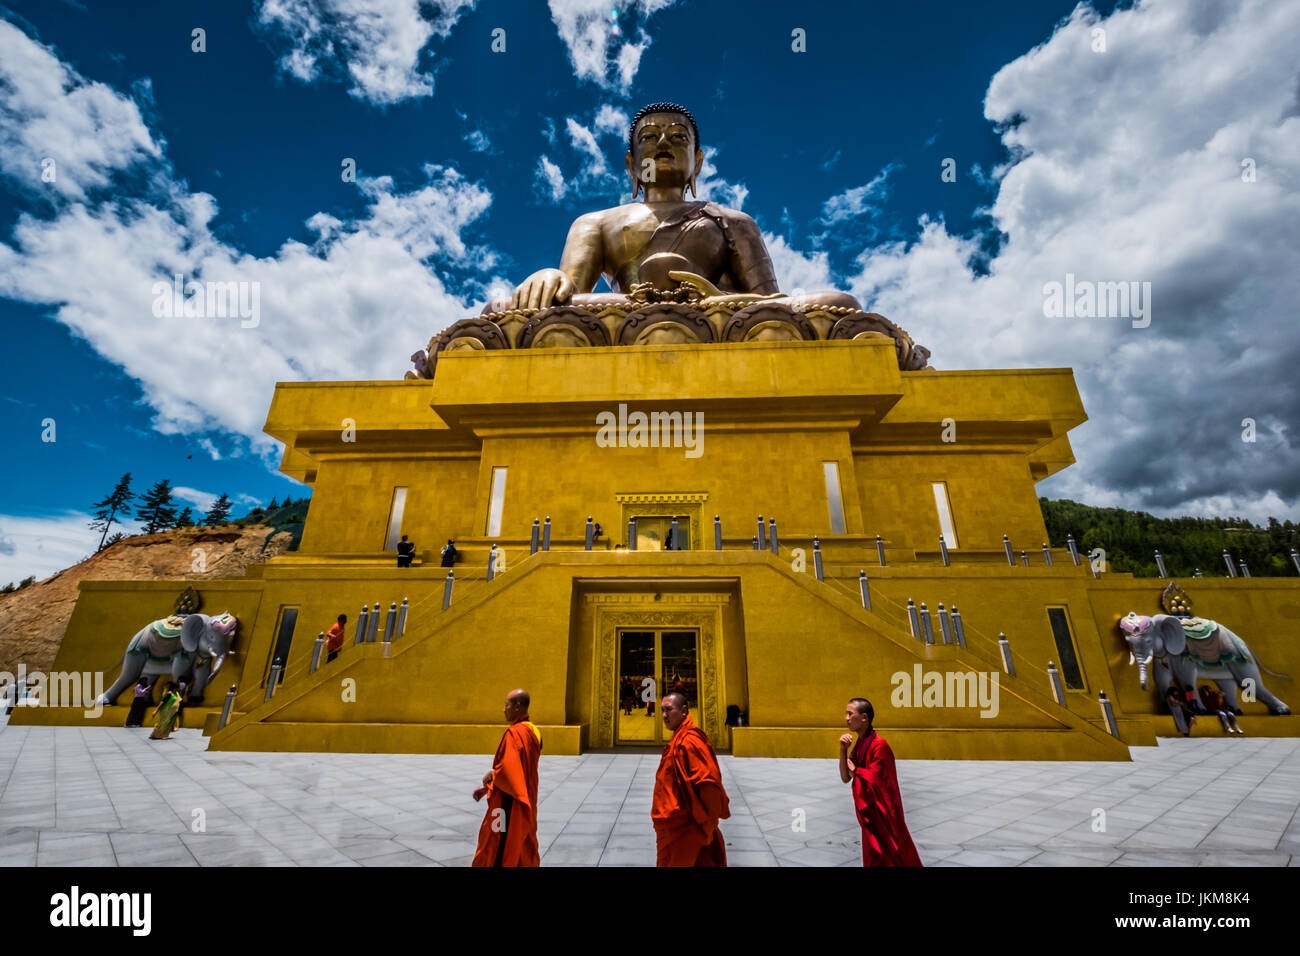 Monks walking by a giant Buddha statue in Bhutan - July 2017 Stock Photo